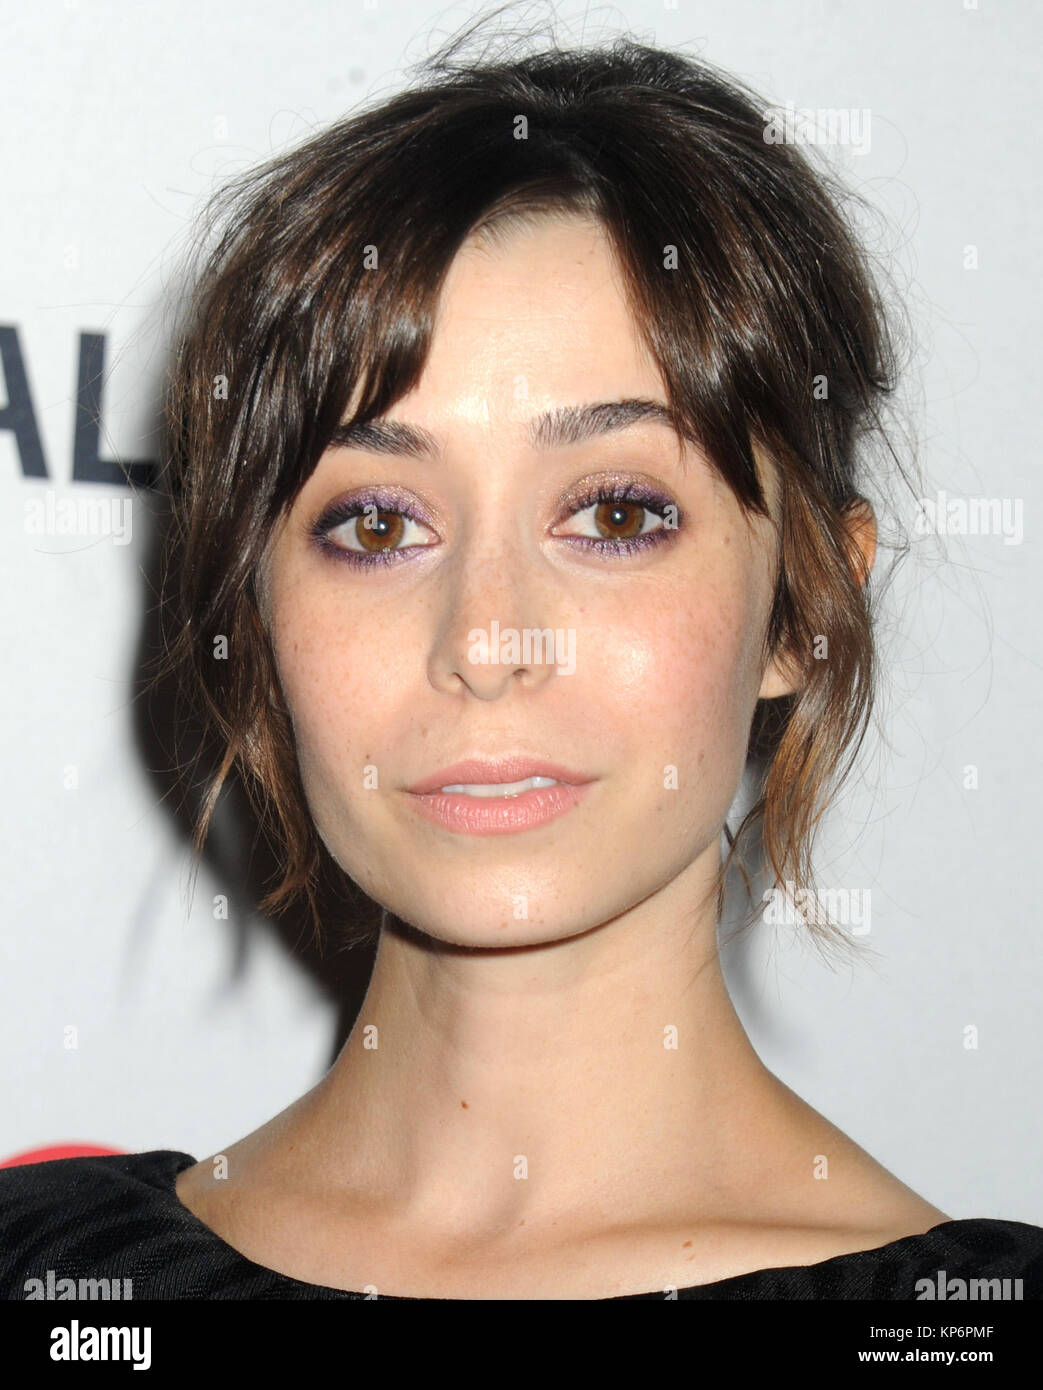 NEW YORK, NY - OCTOBER 16: Cristin Milioti attends a photocall for 'Fargo'  at The Paley Center for Media on October 16, 2015 in New York City. People:  Cristin Milioti Stock Photo - Alamy